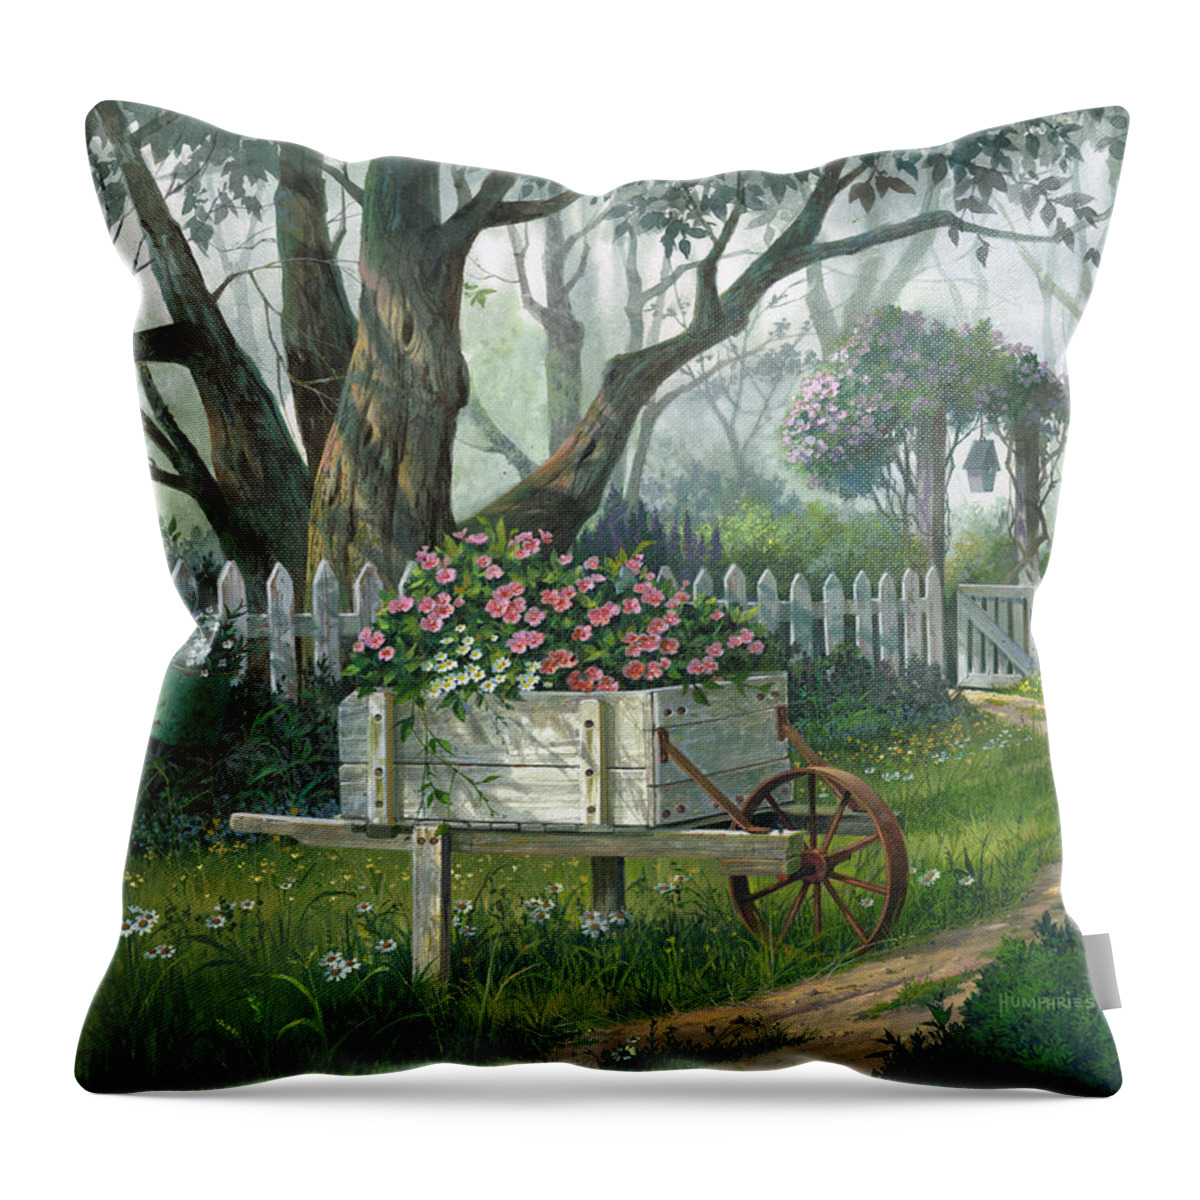 Michael Humphries Throw Pillow featuring the painting Enchanted by Michael Humphries